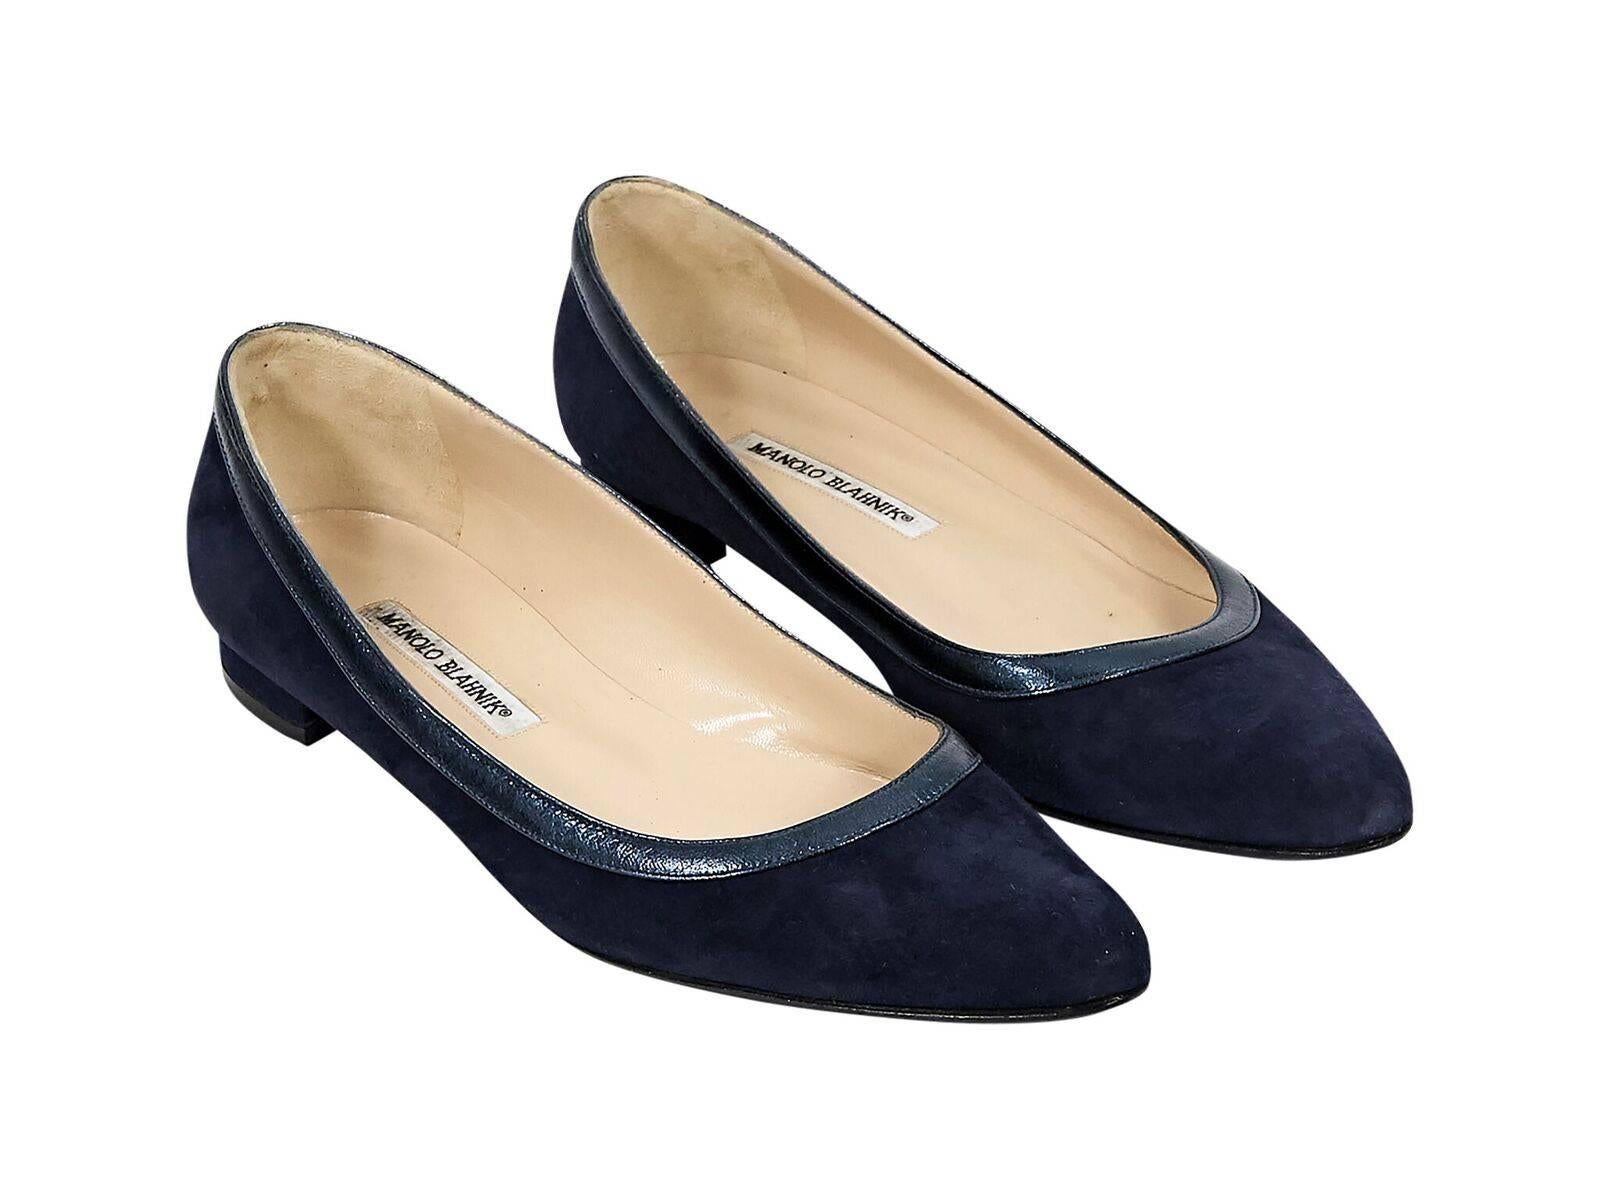 Product details:  Navy blue suede flats by Manolo Blahnik.  Trimmed with metallic blue leather.  Round toe.  Slip-on style. 
Condition: Pre-owned. Very good.
Est. Retail $298